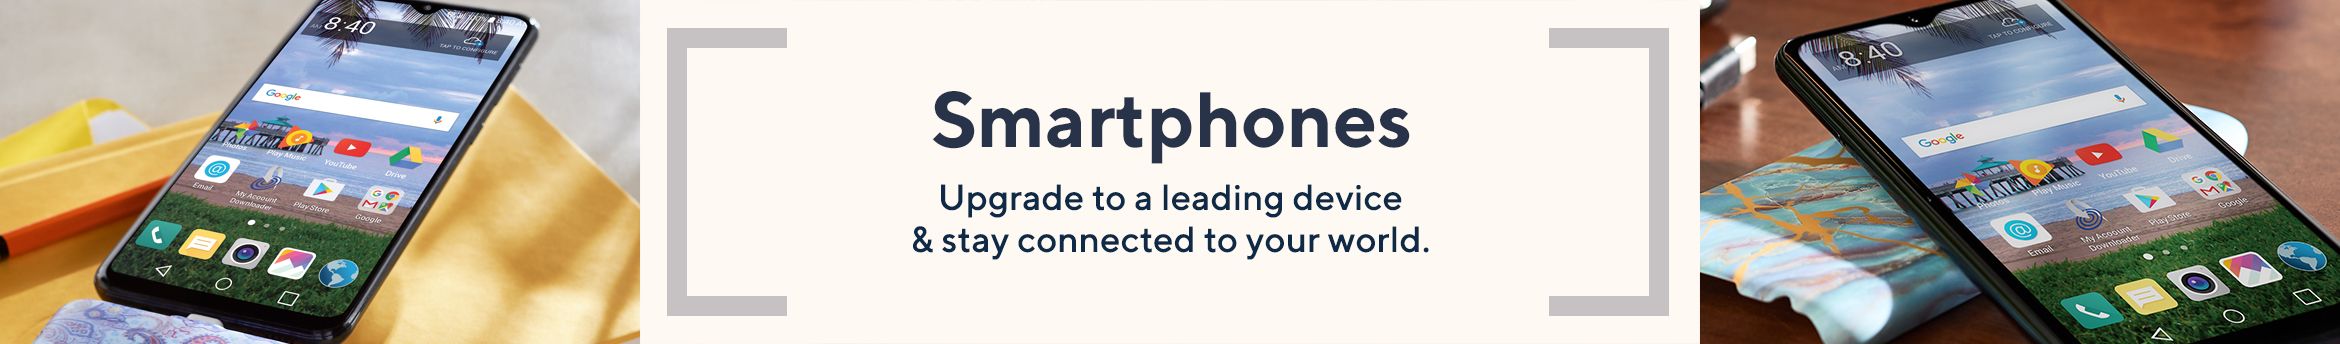 Smartphones.  Upgrade to a leading device & stay connected to your world.